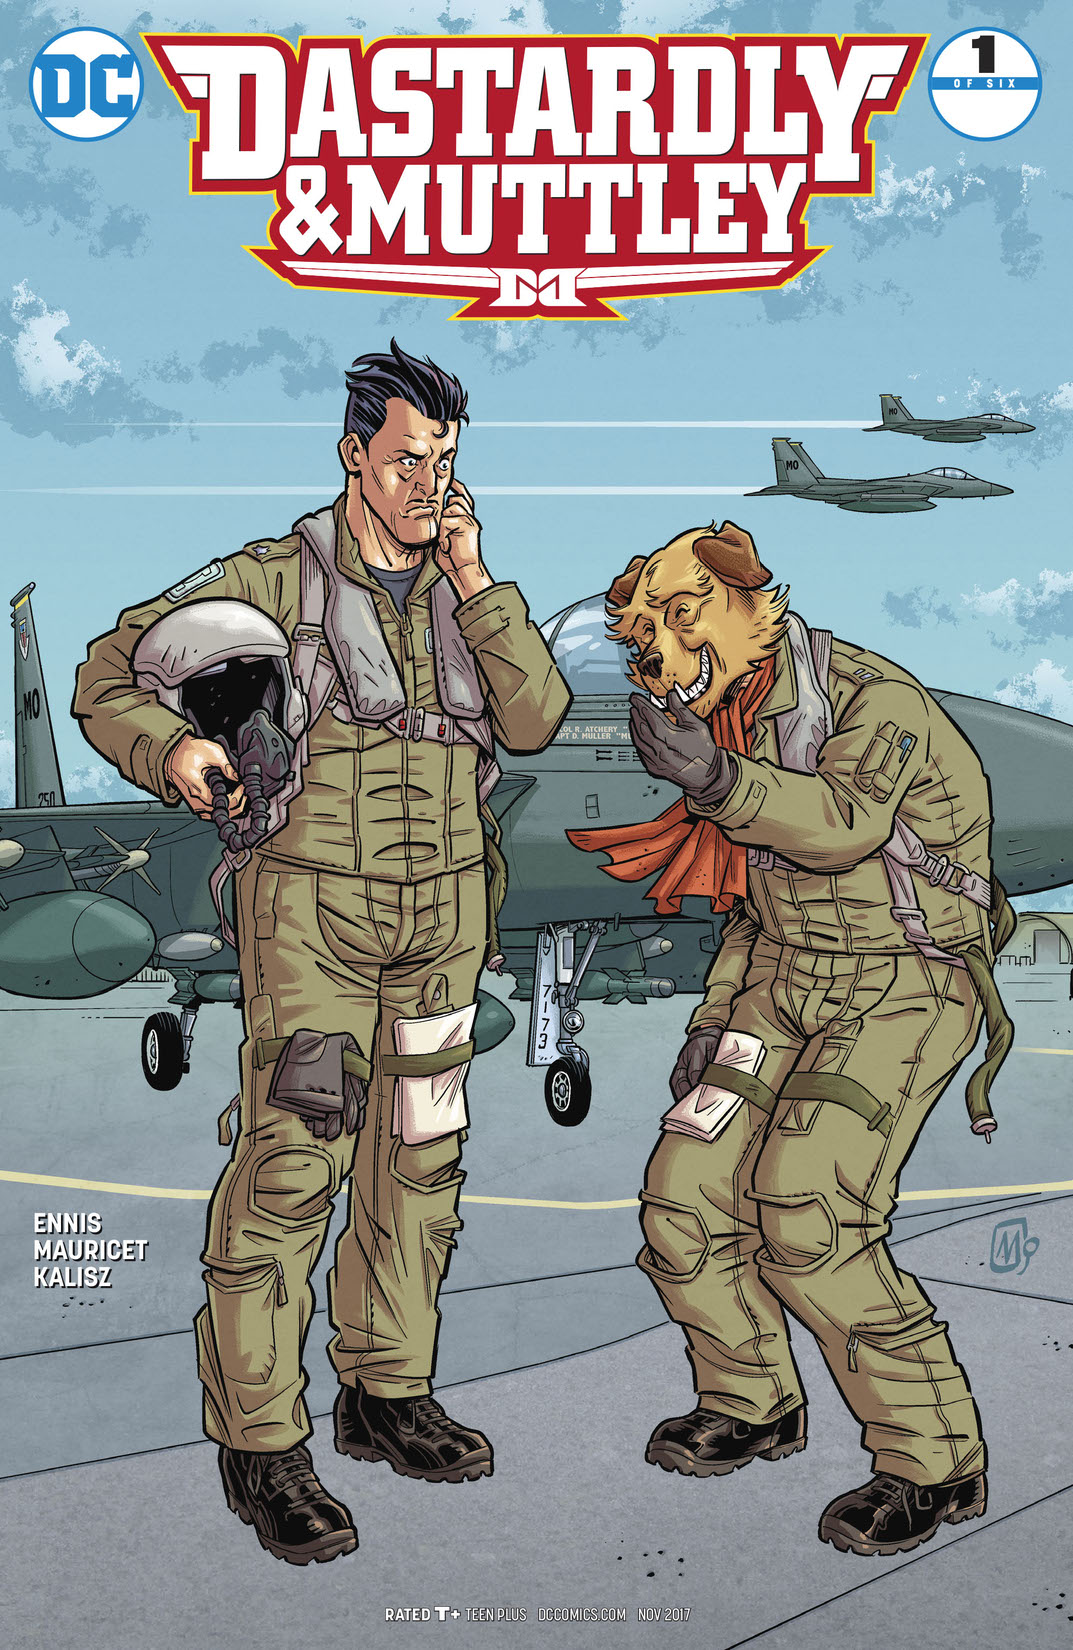 Dastardly & Muttley #1 preview images